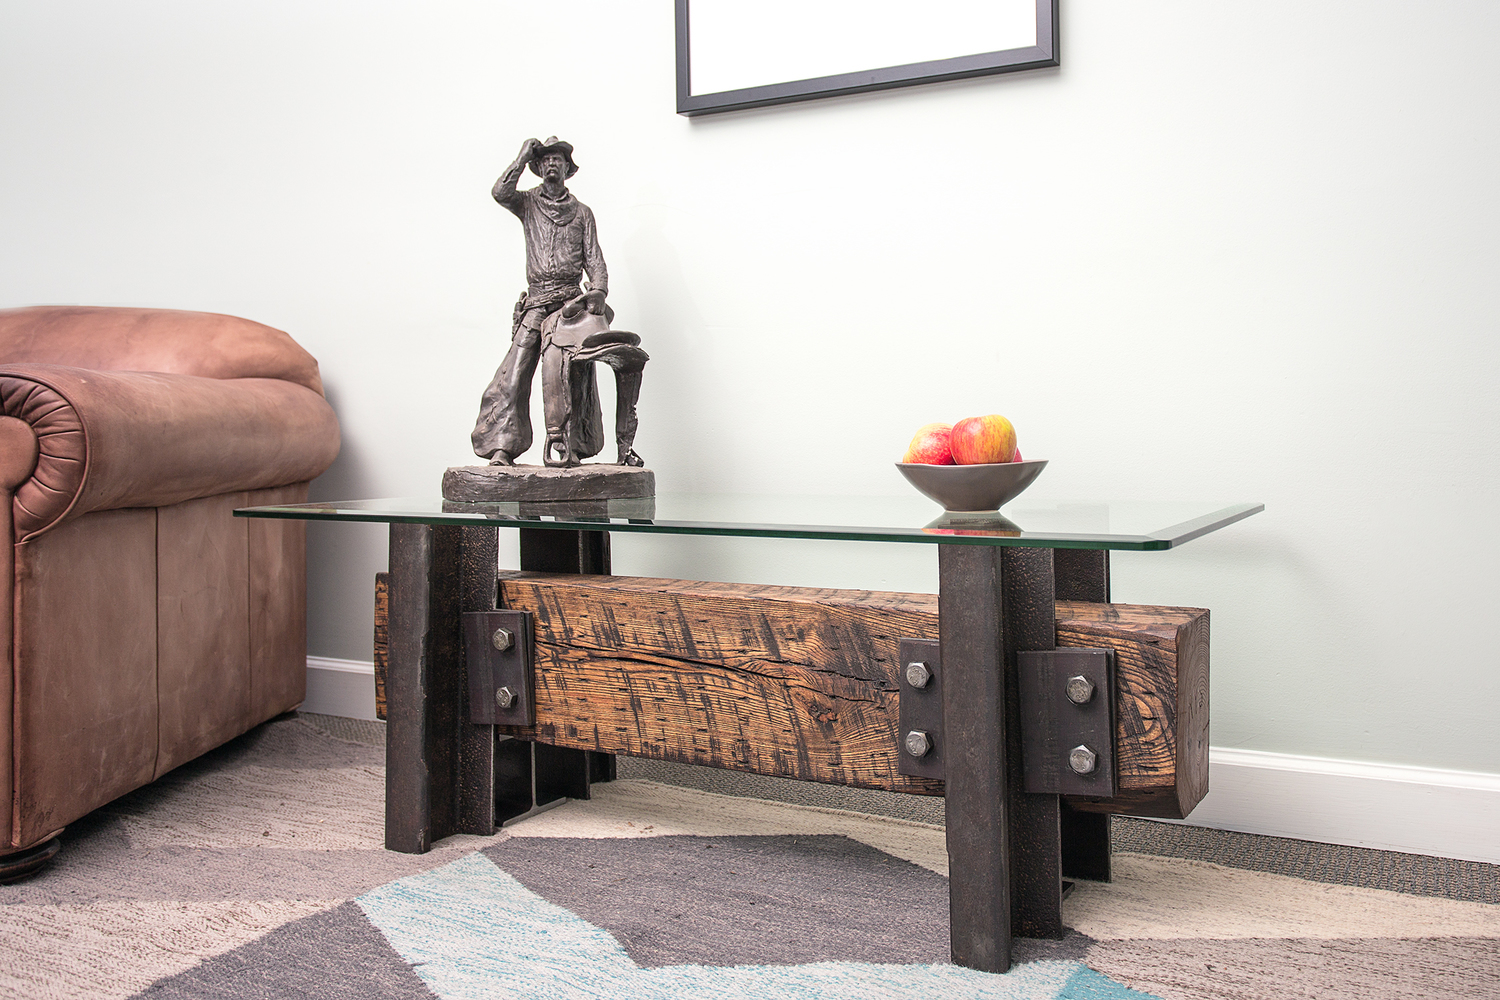 wood-steel-coffee-table-cowboy-statue-leather-chair